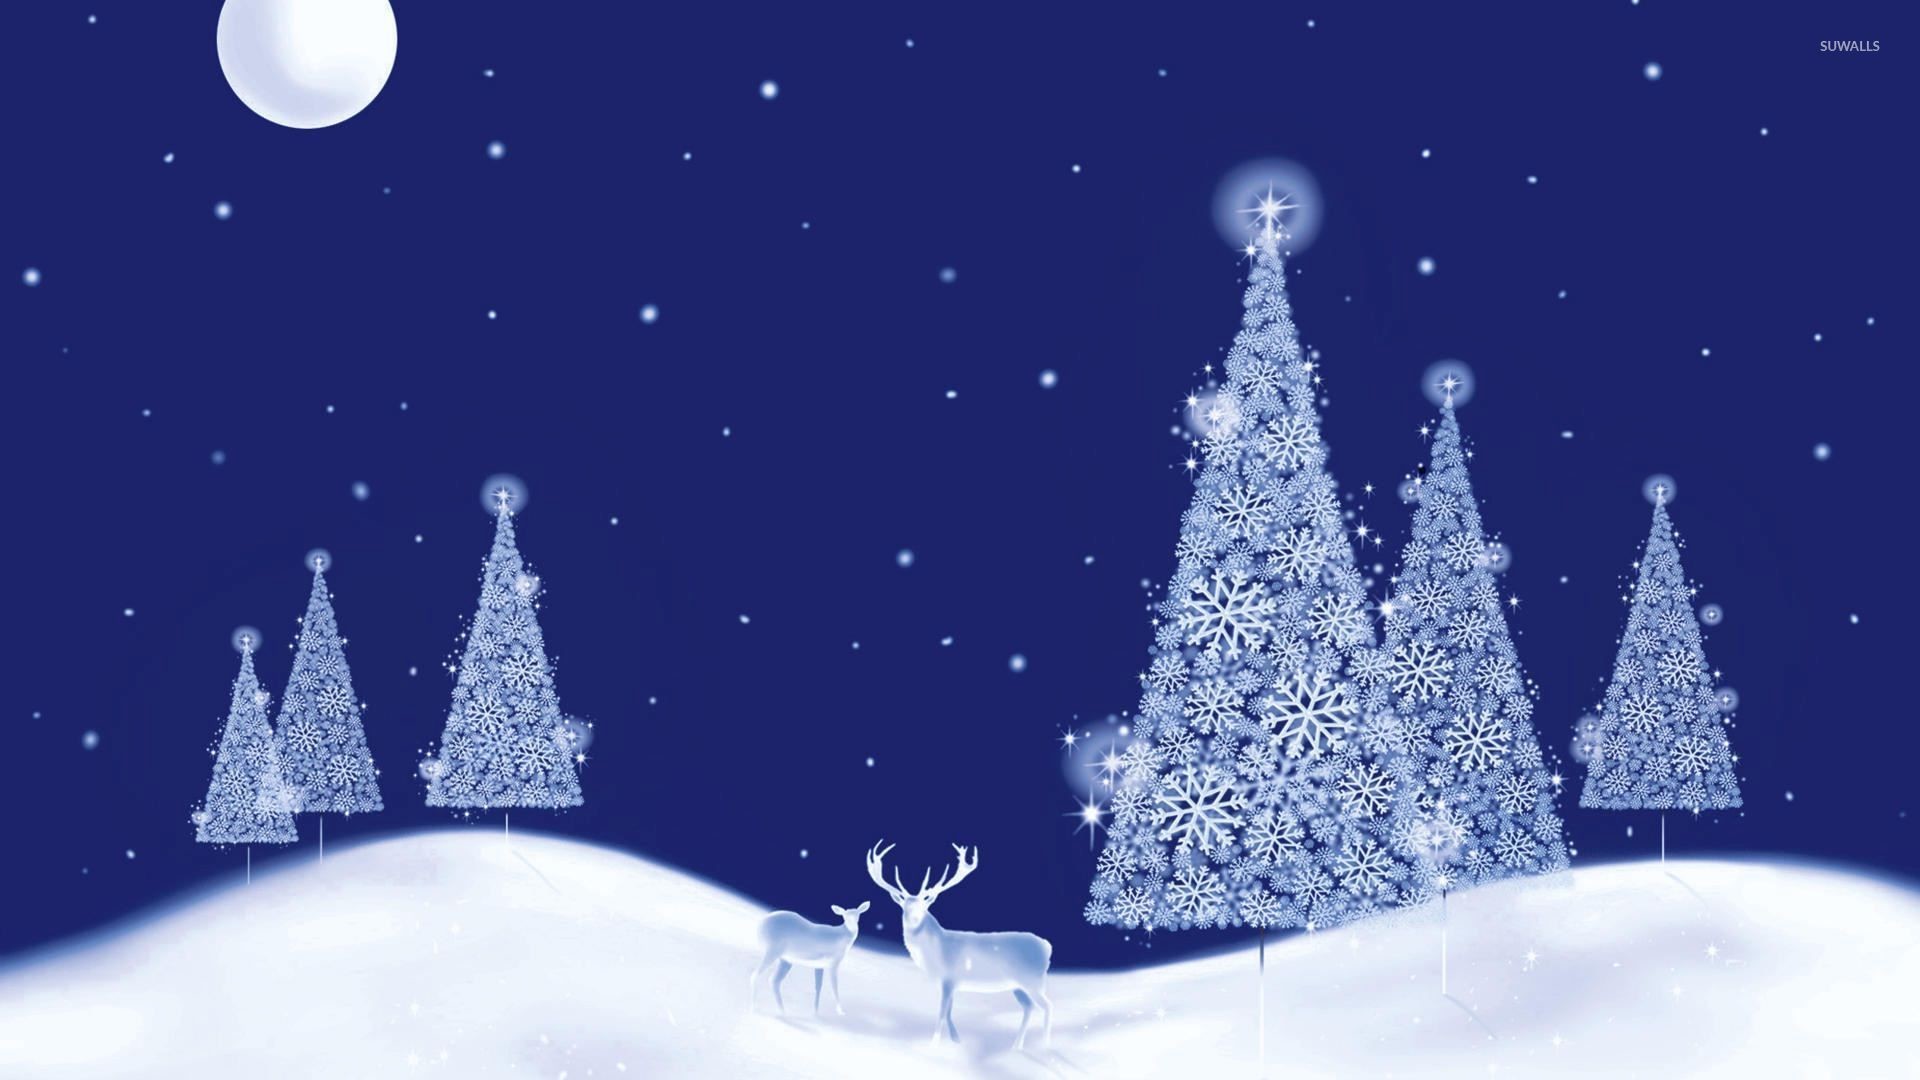 Glowing White Christmas Trees On A Beautiful Winter   White 1920x1080